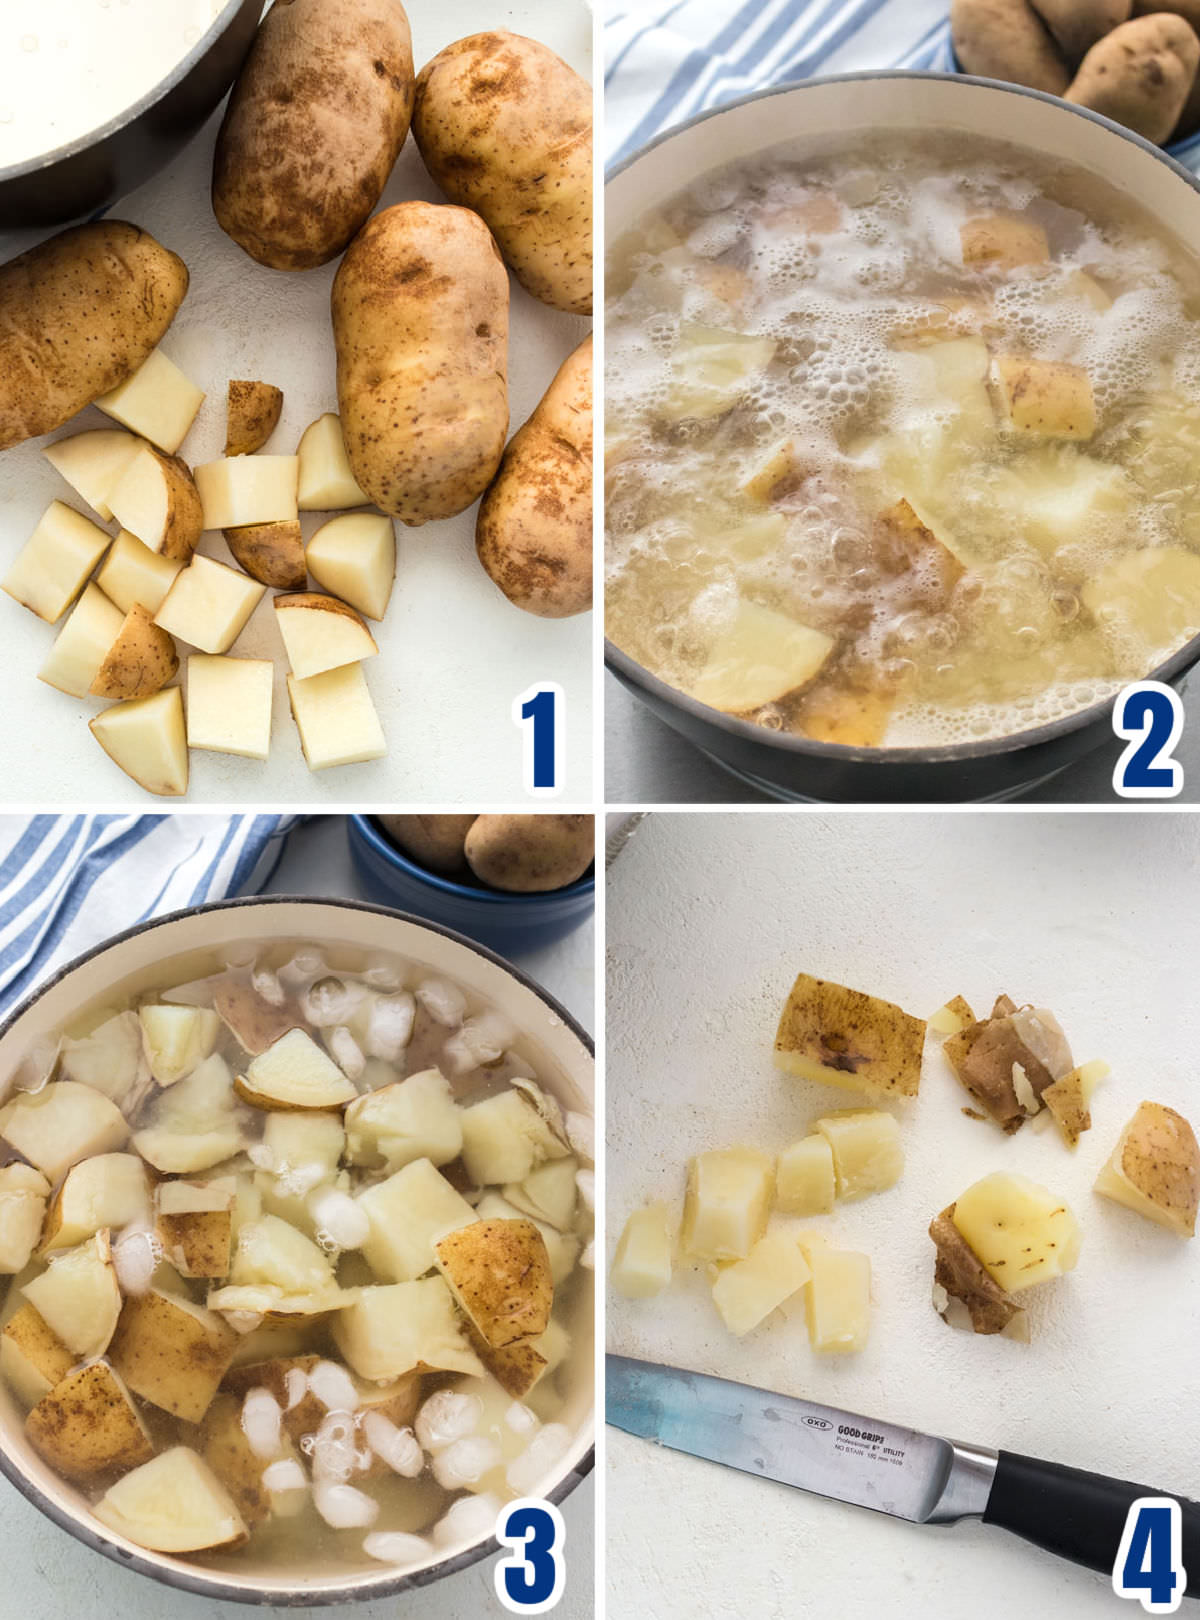 Collage image showing how to cook the potatoes.